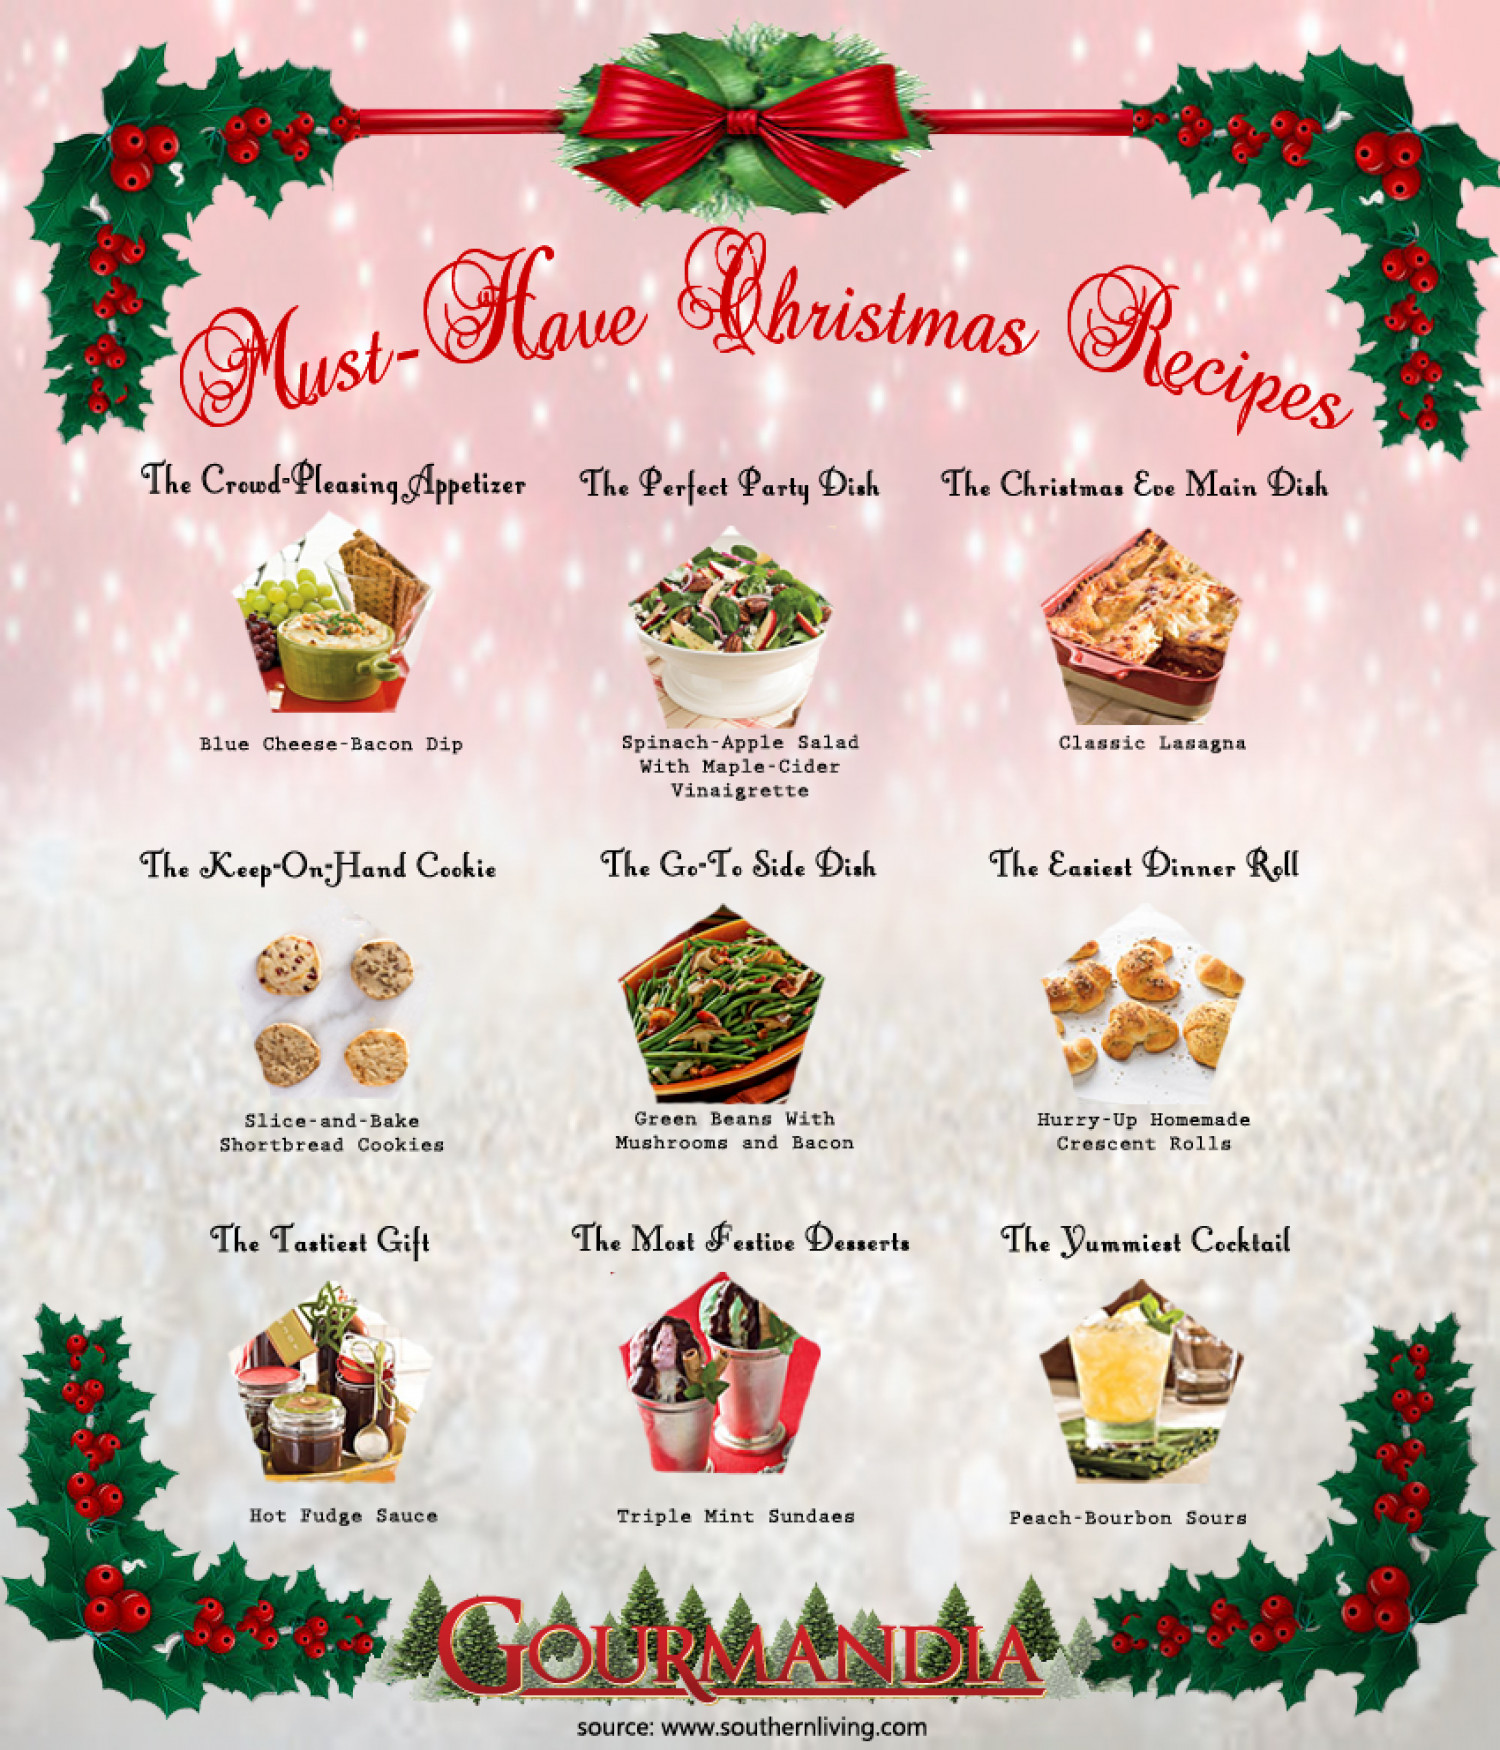 Must-Have Christmas Recipes Infographic